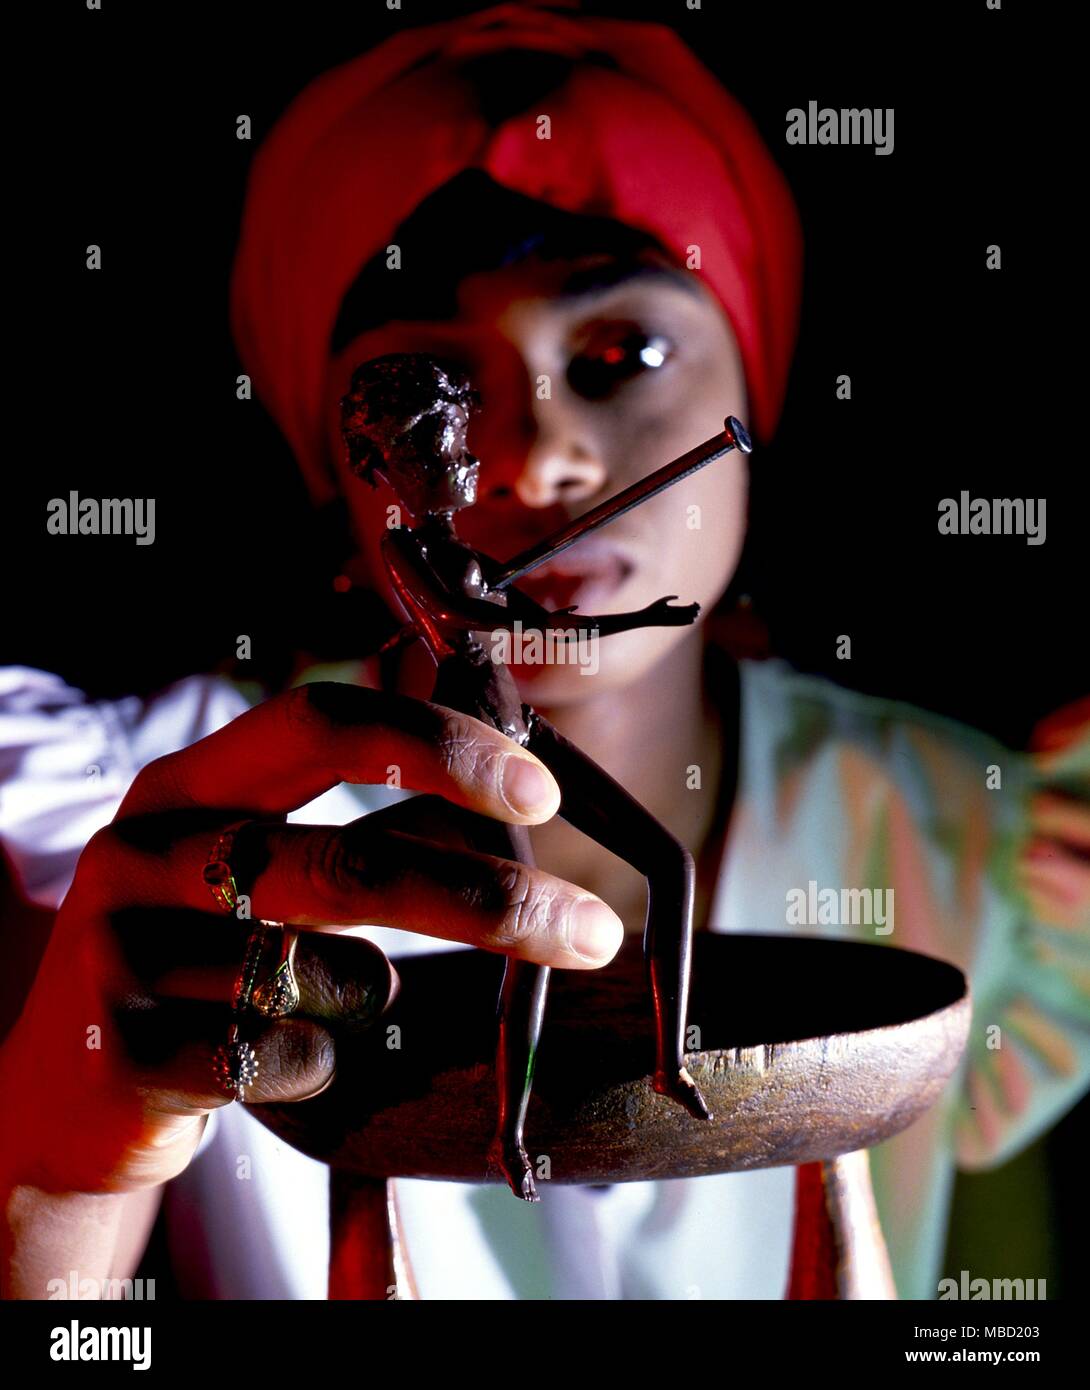 Voodoo poppet (witchcraft doll) nailed through as in a ritual. Stock Photo